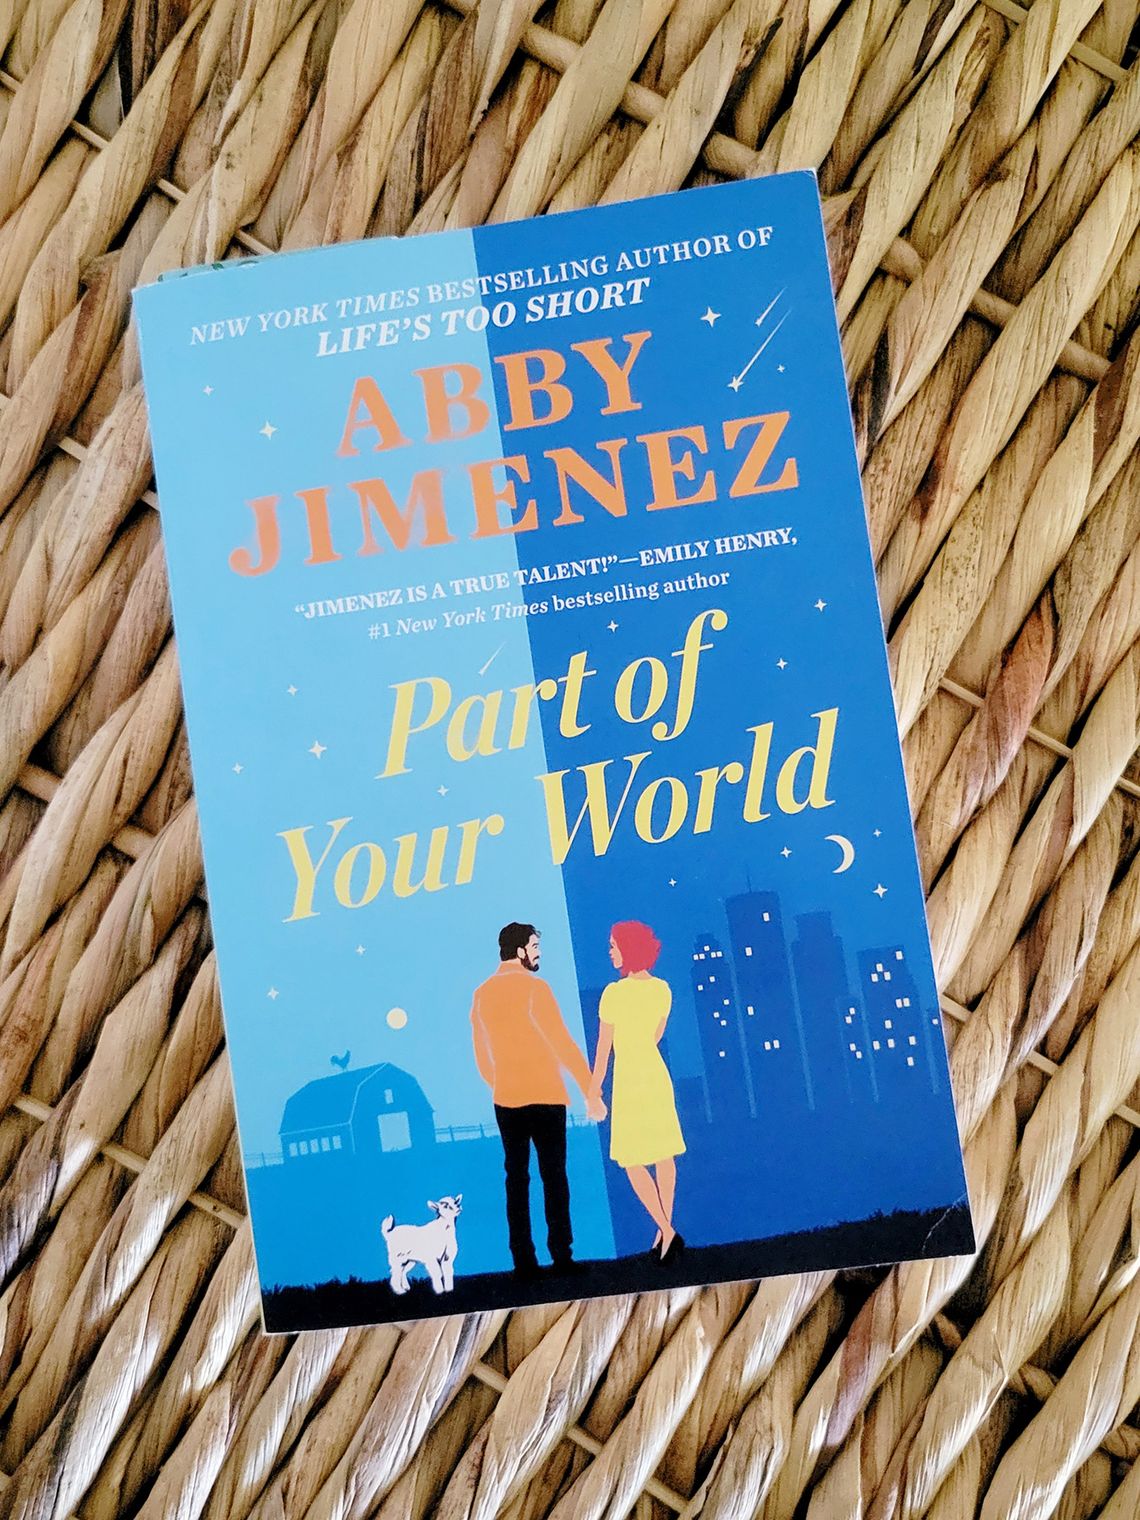 Allison's Book Report: "Part of Your World” by Abby Jimenez